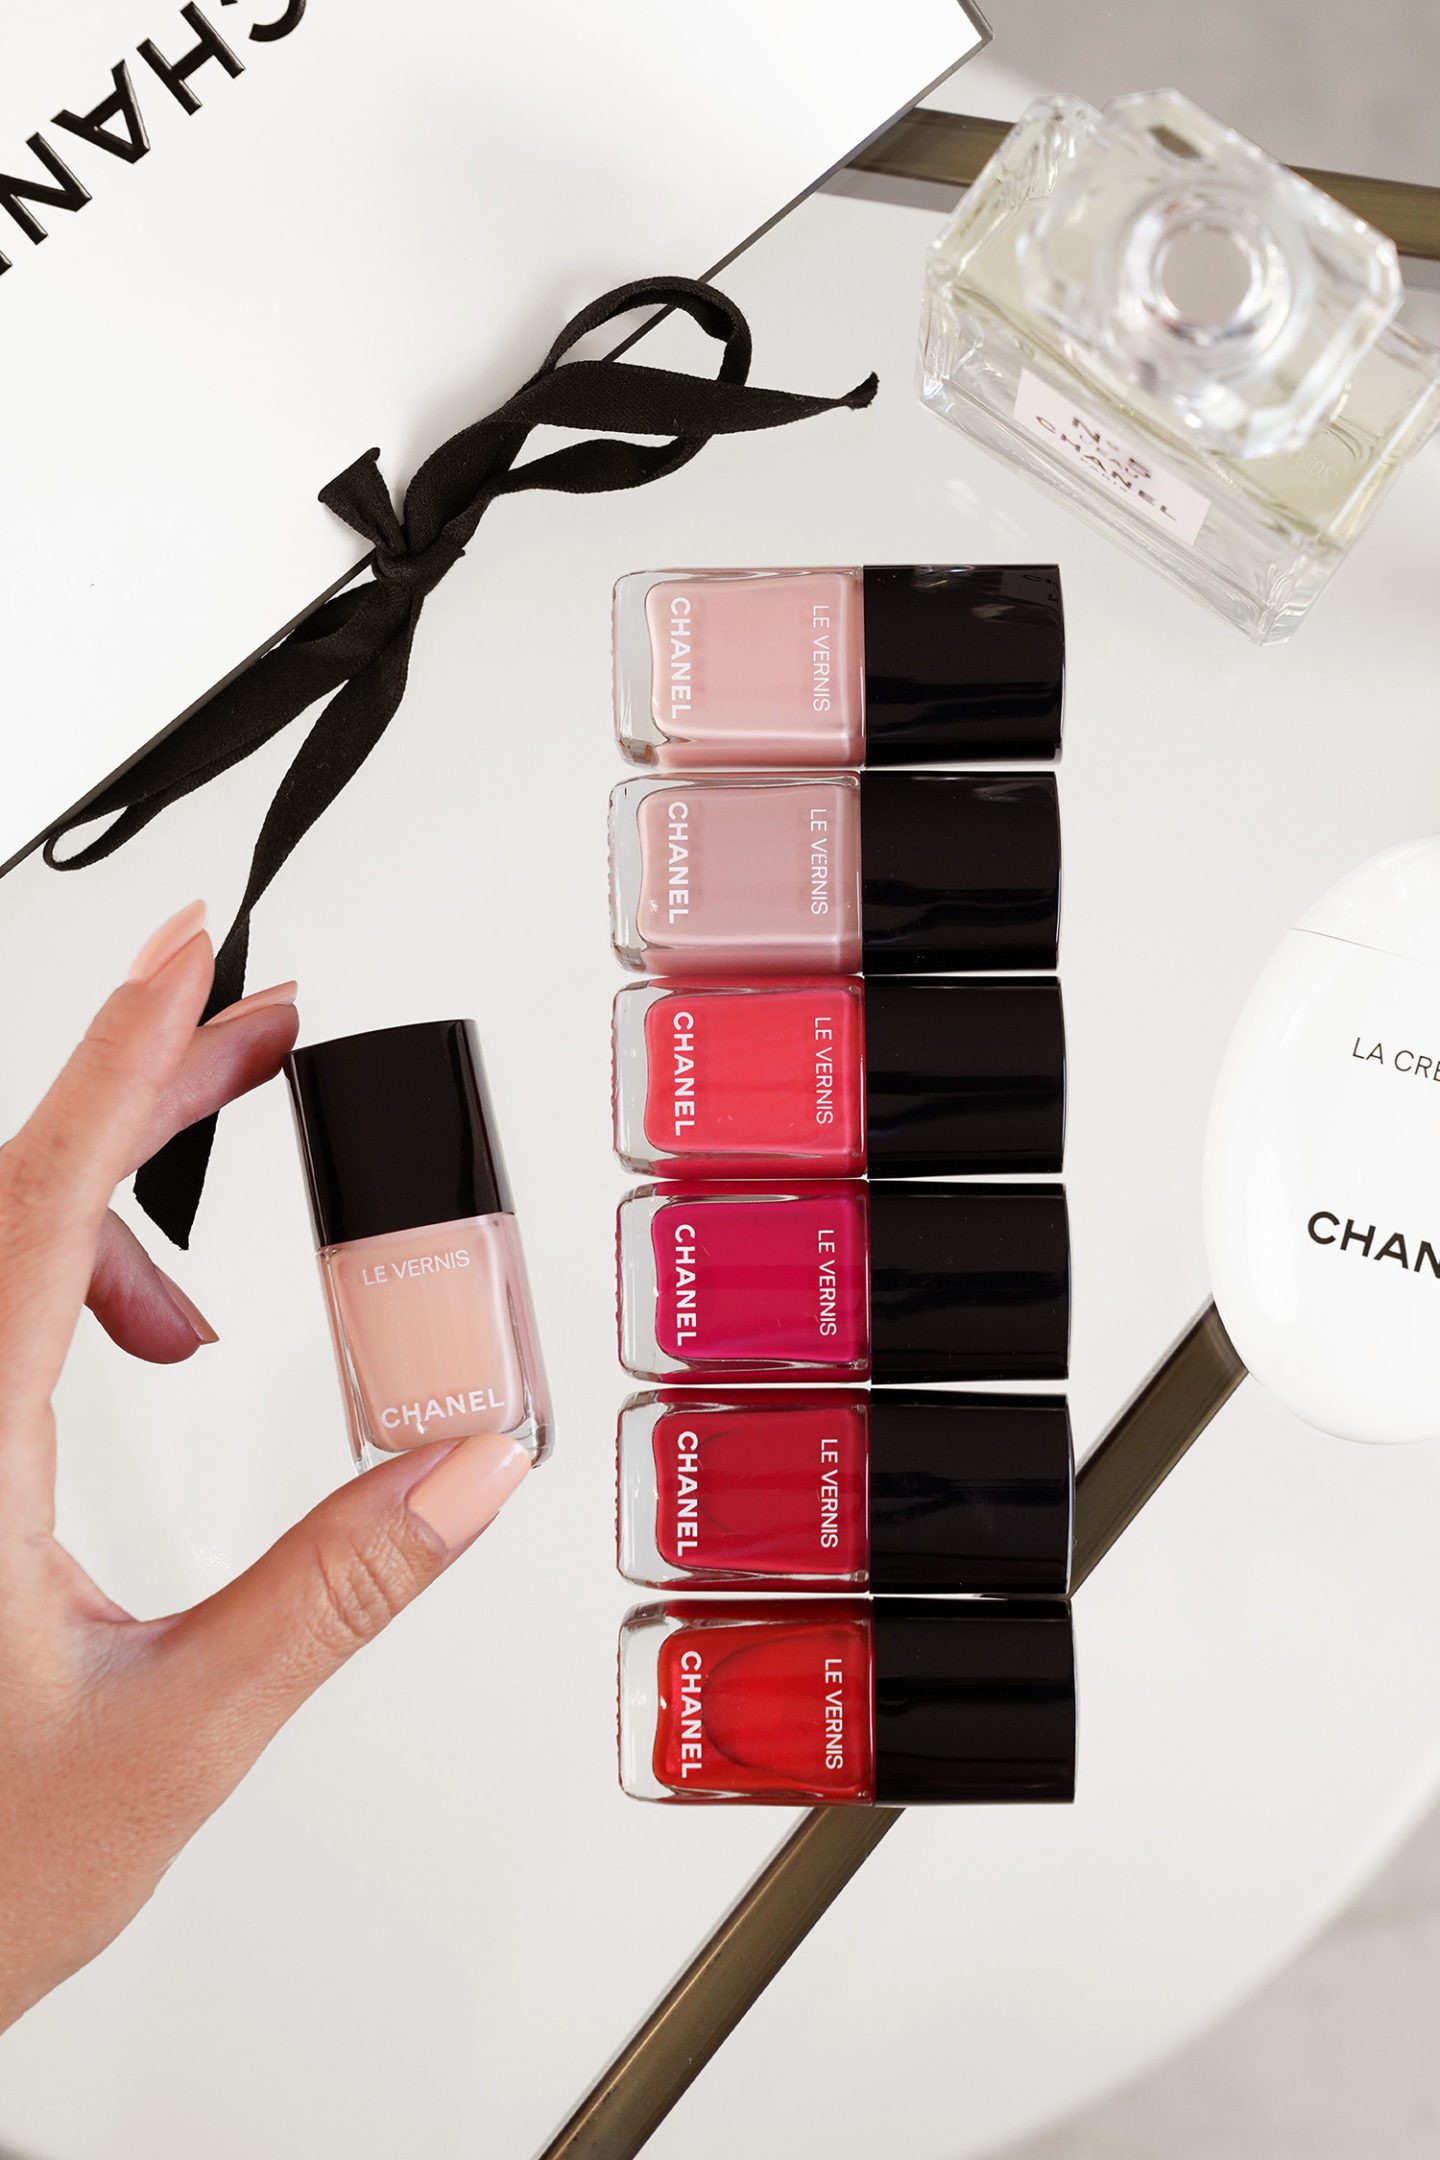 Best Chanel Le Vernis Nail Polishes